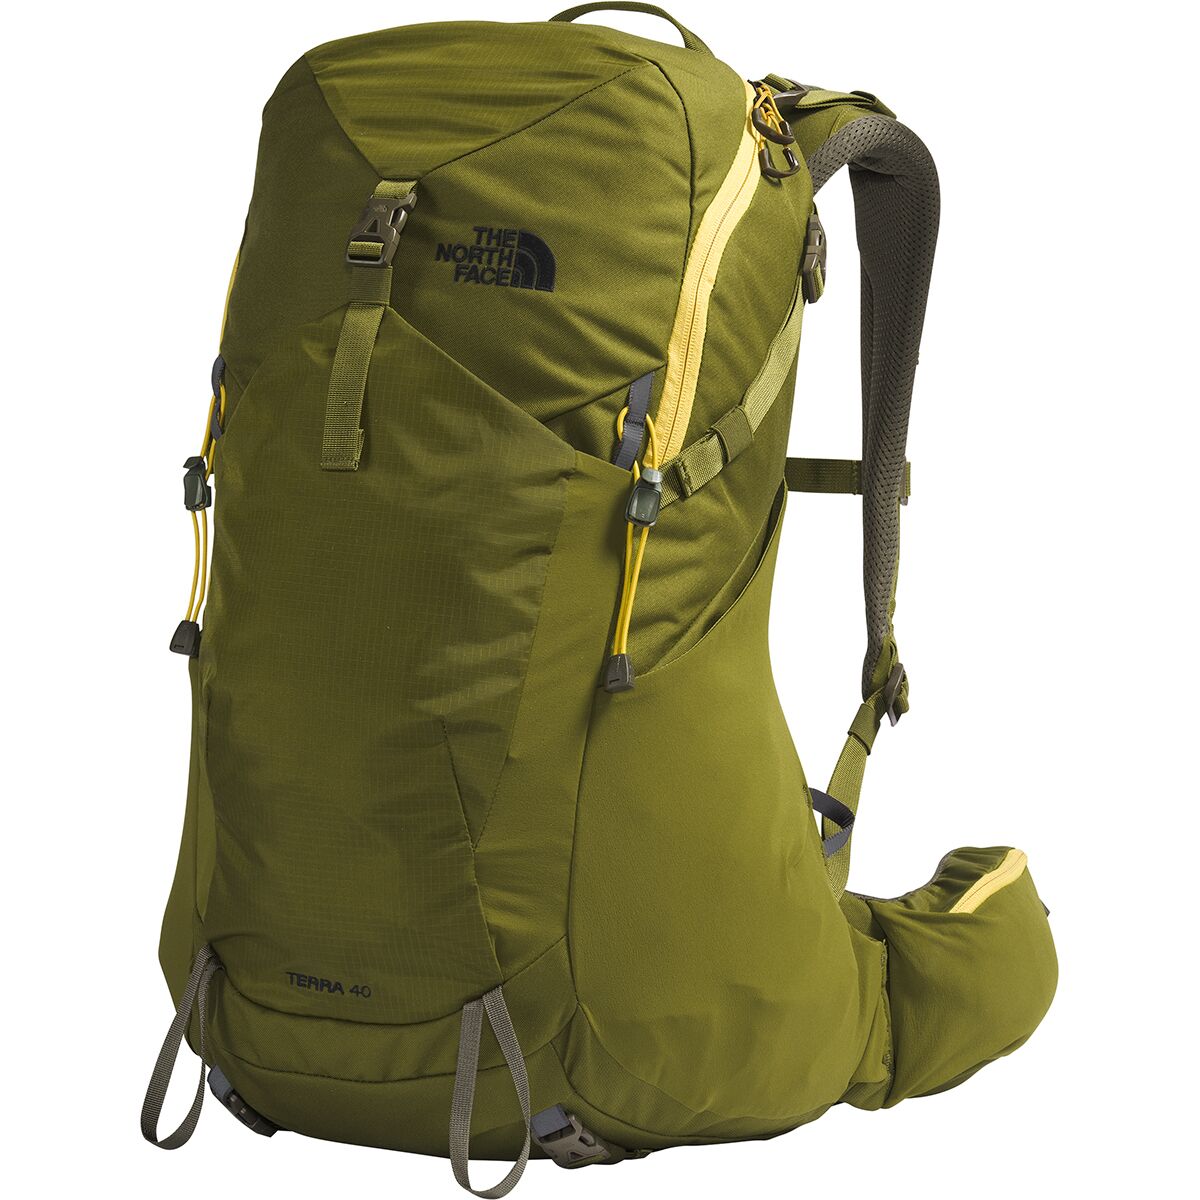 Photos - Backpack The North Face Terra 40L  